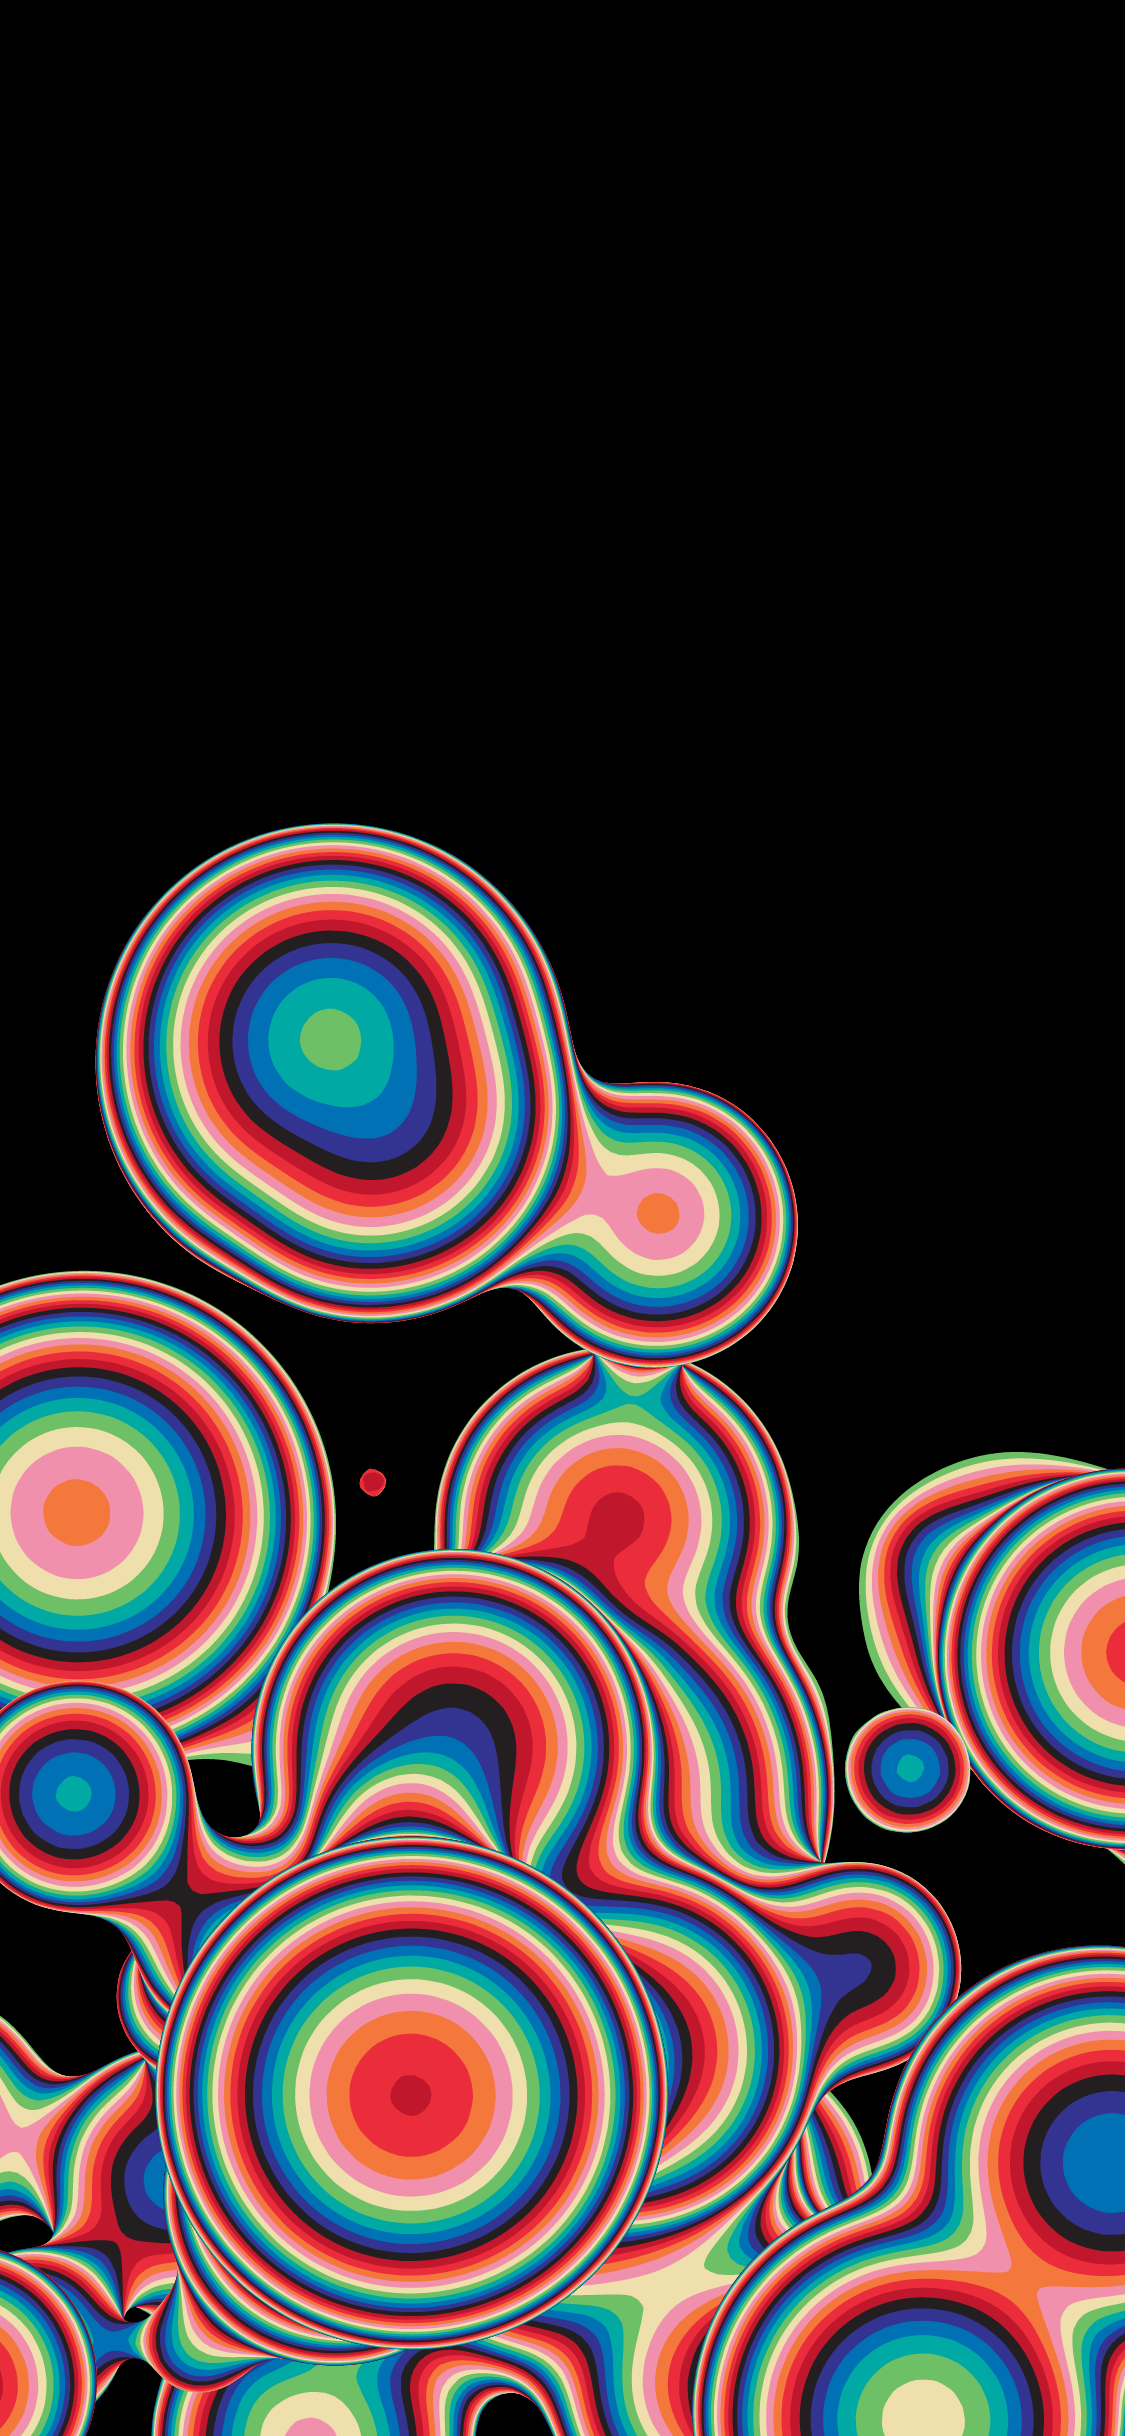 A colorful abstract image of circles on black background - Cool, phone